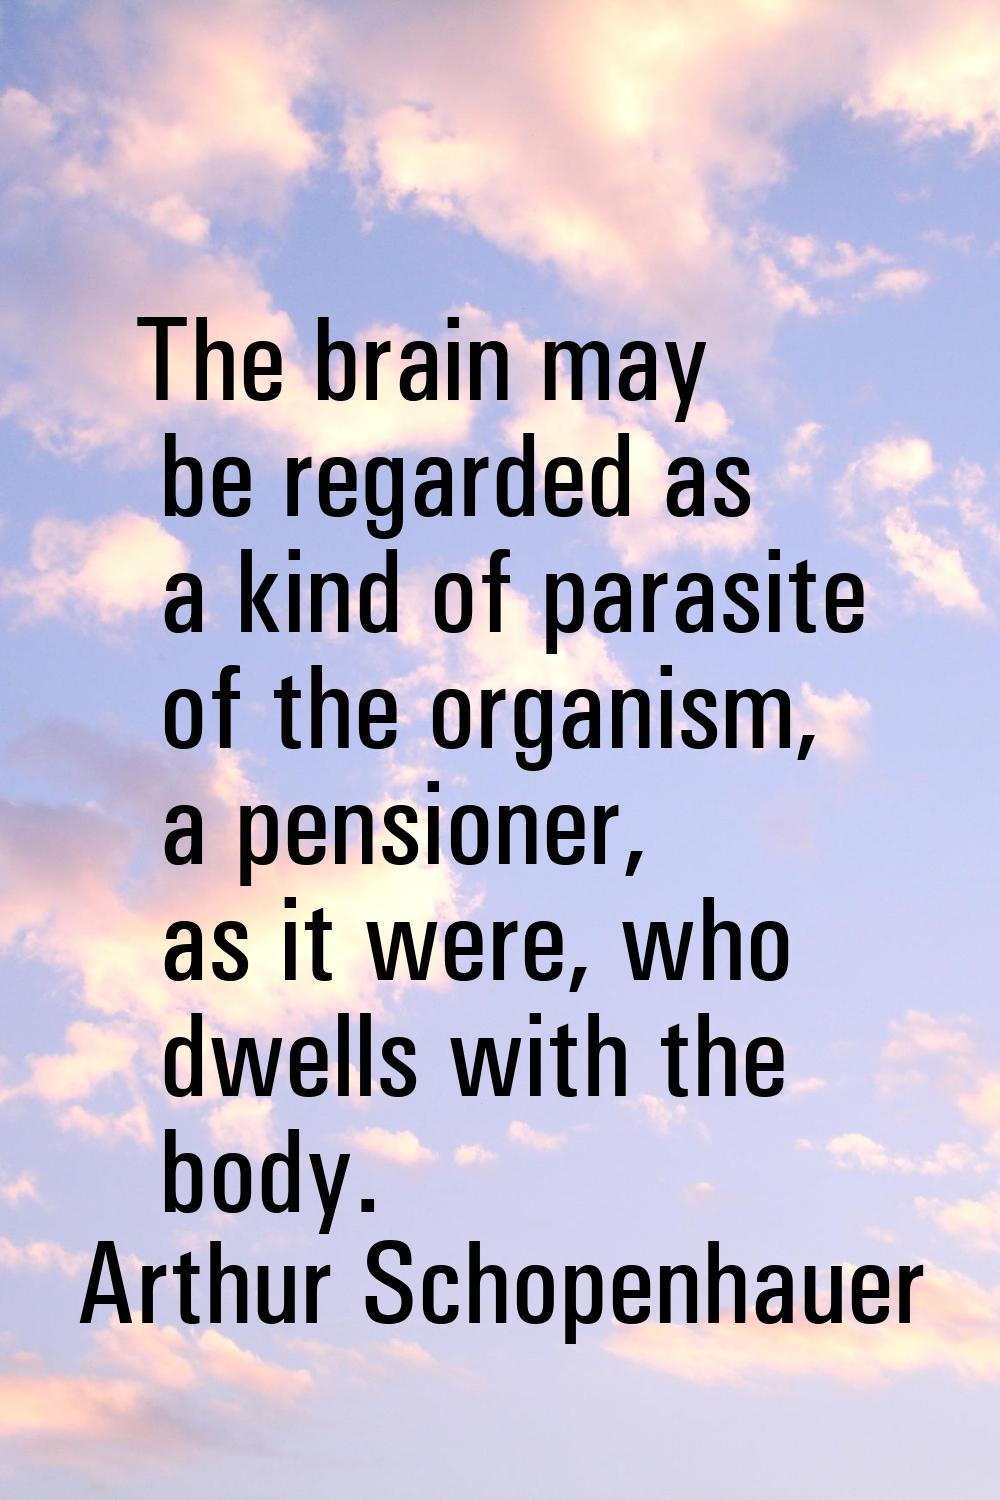 The brain may be regarded as a kind of parasite of the organism, a pensioner, as it were, who dwell